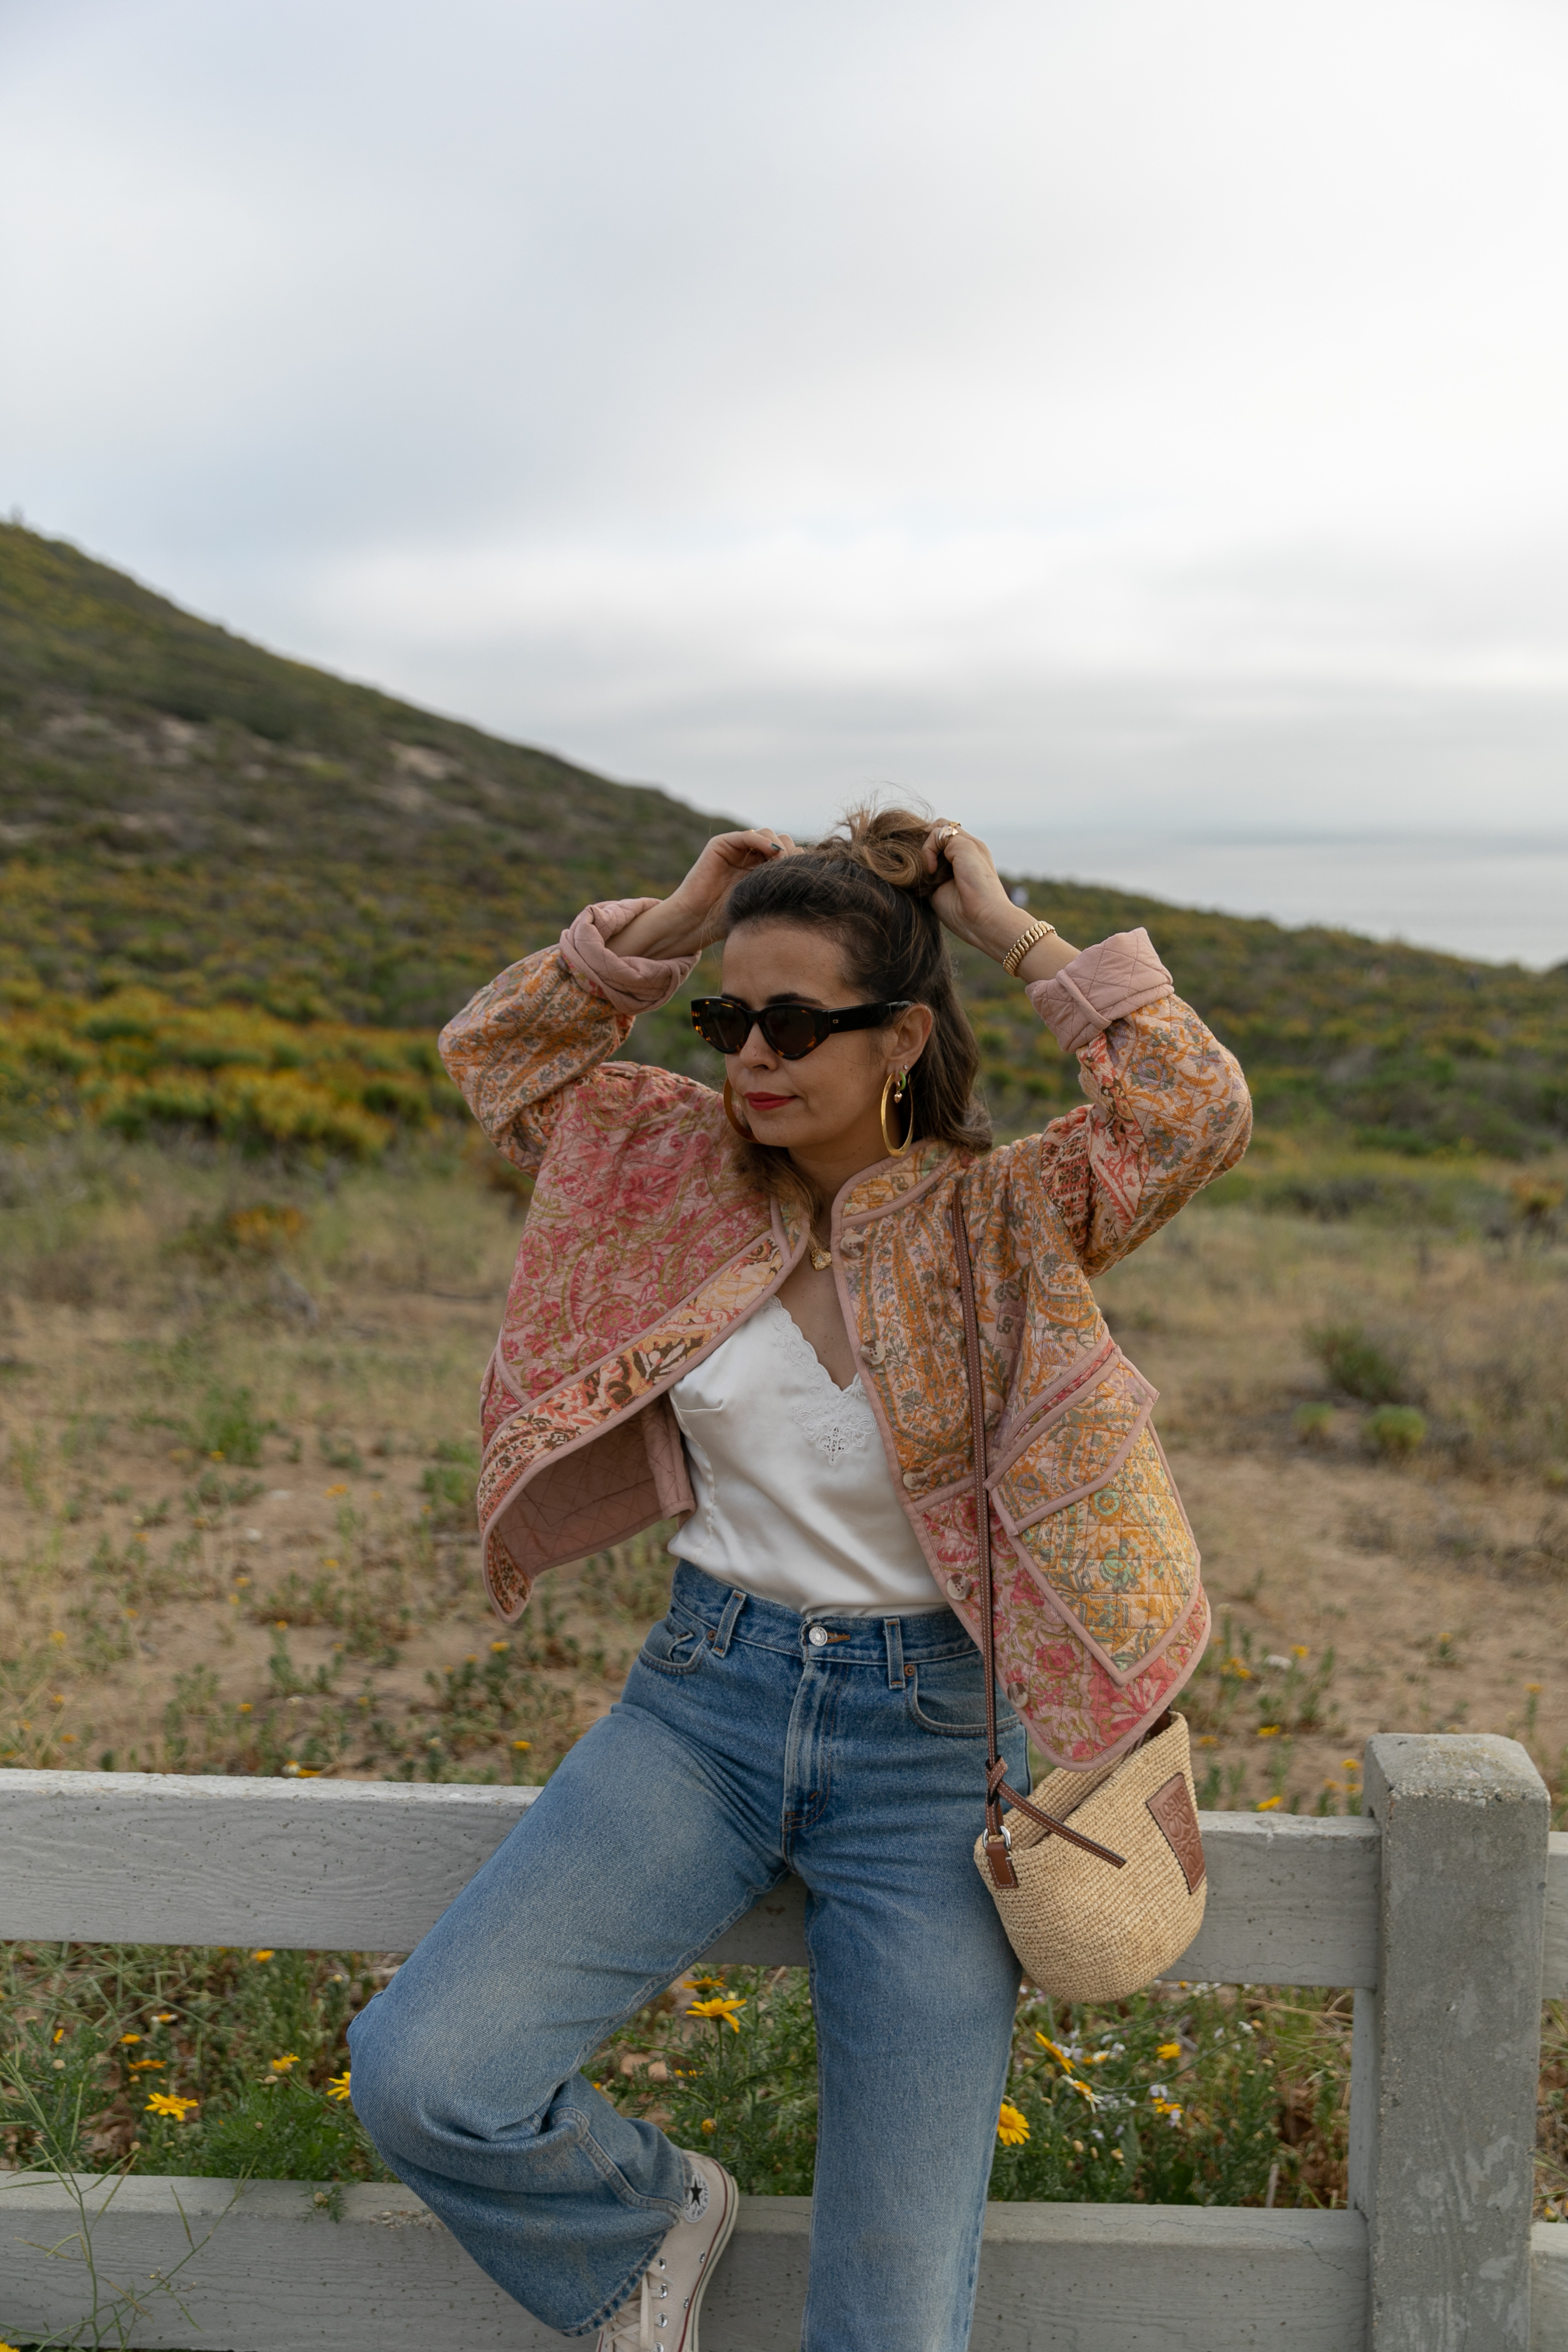 Sara from Collage Vintage wearing a patchwork jacket and vintage Levis